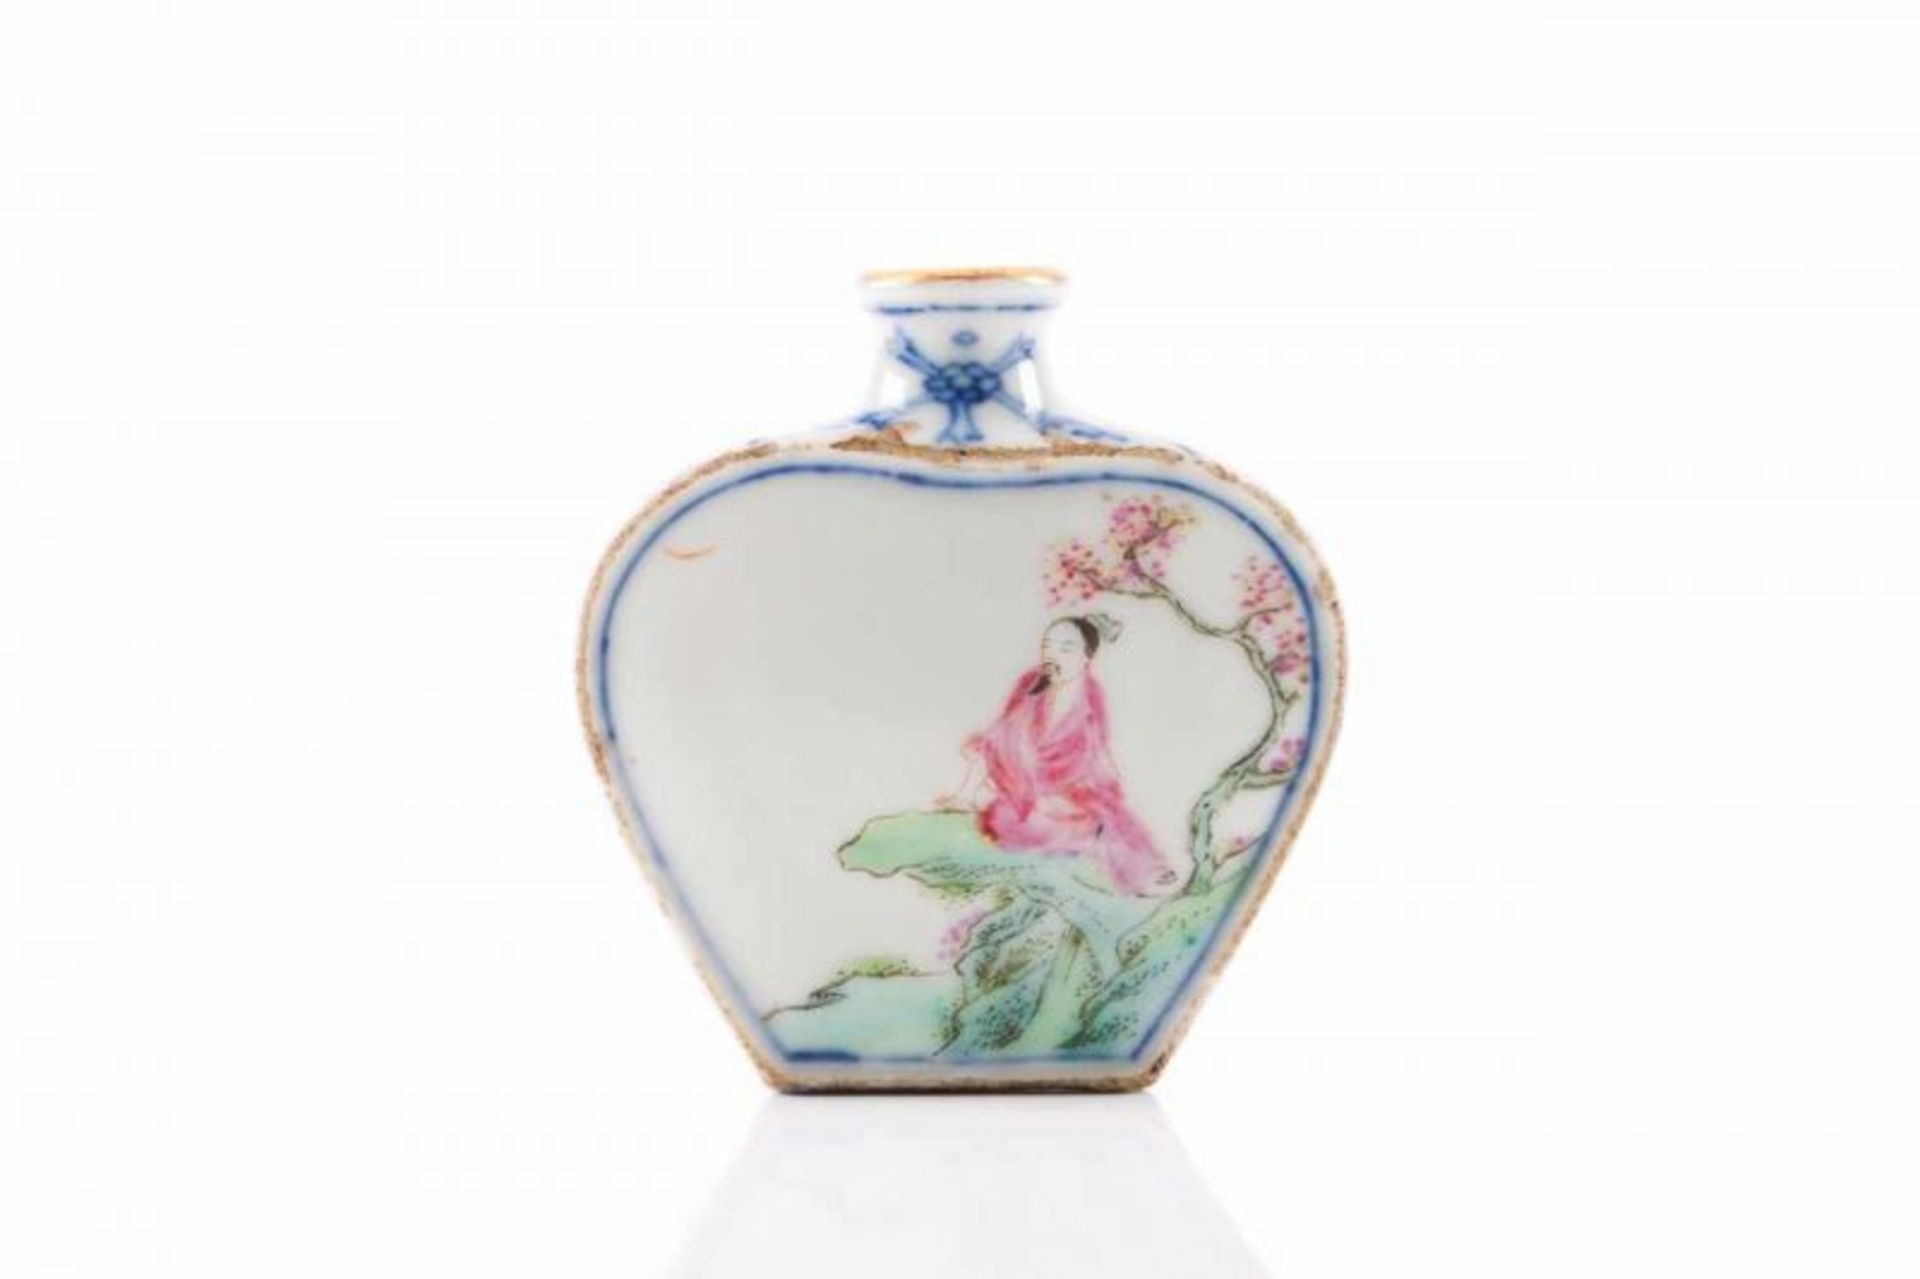 Snuff-bottle Chinese porcelain Polychome Famille Rose decoration one side depicting landscape with - Image 2 of 3